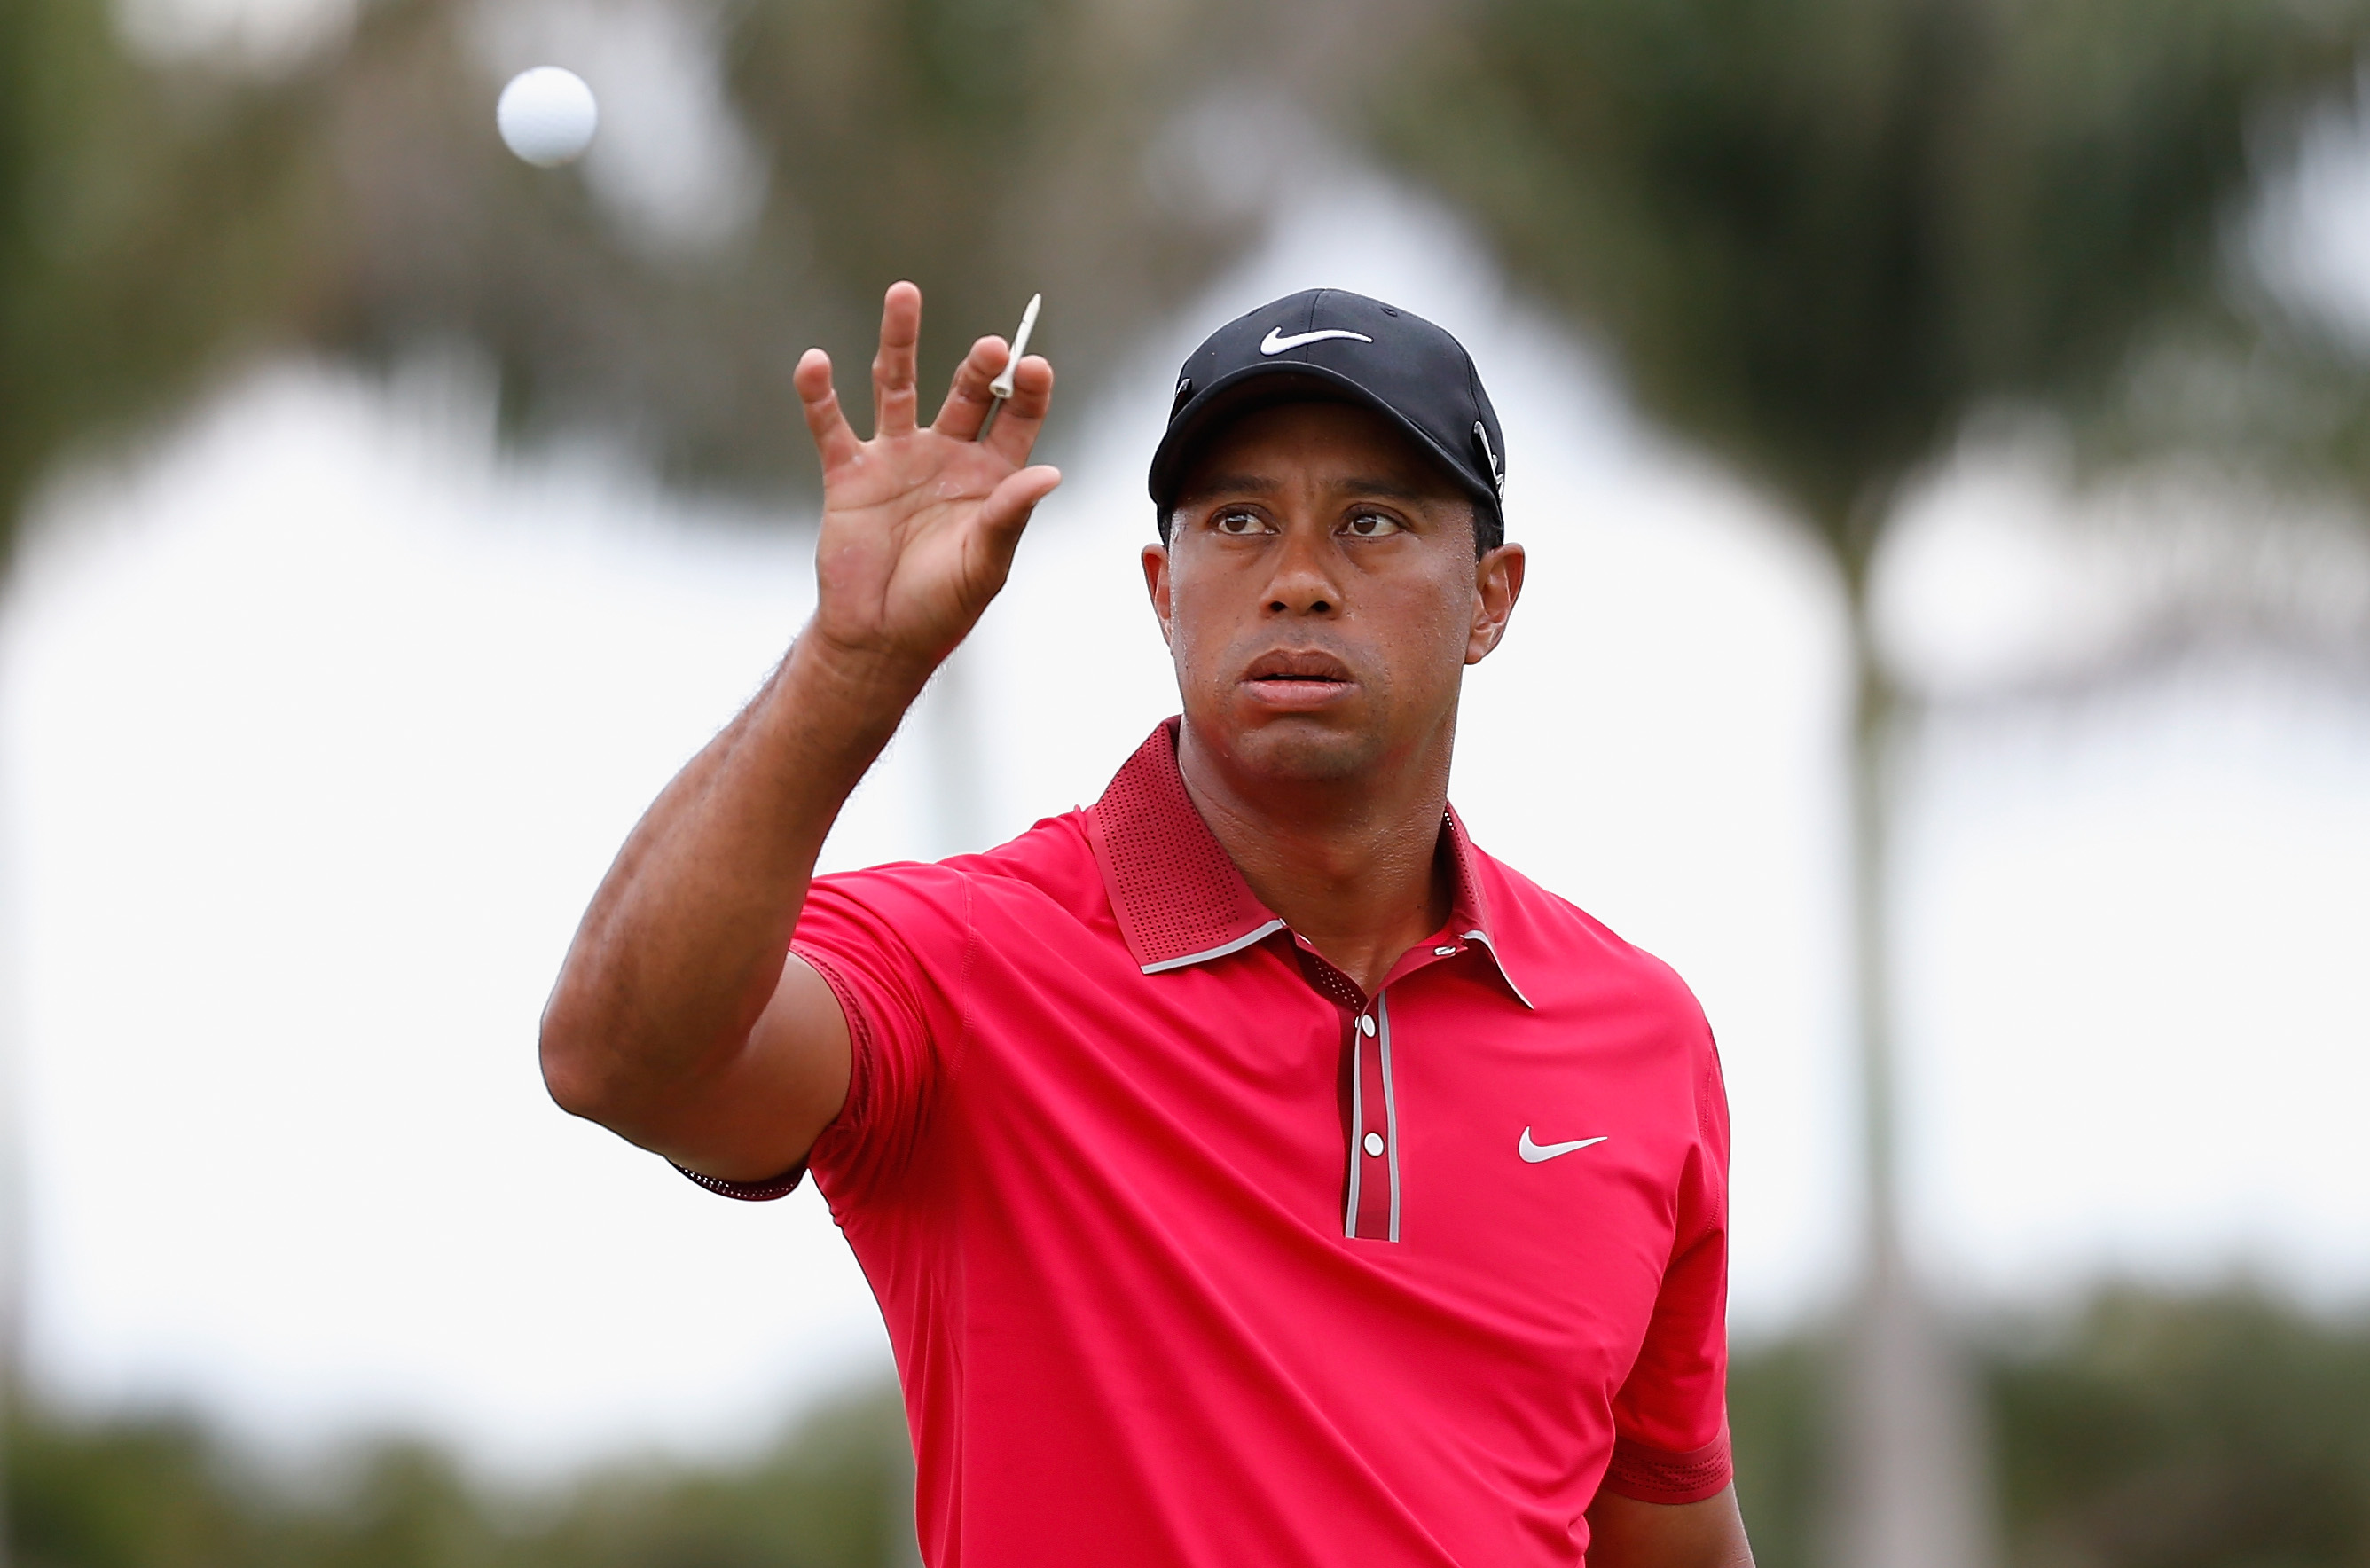 Tiger Woods has back surgery, will miss the Masters - CBS News